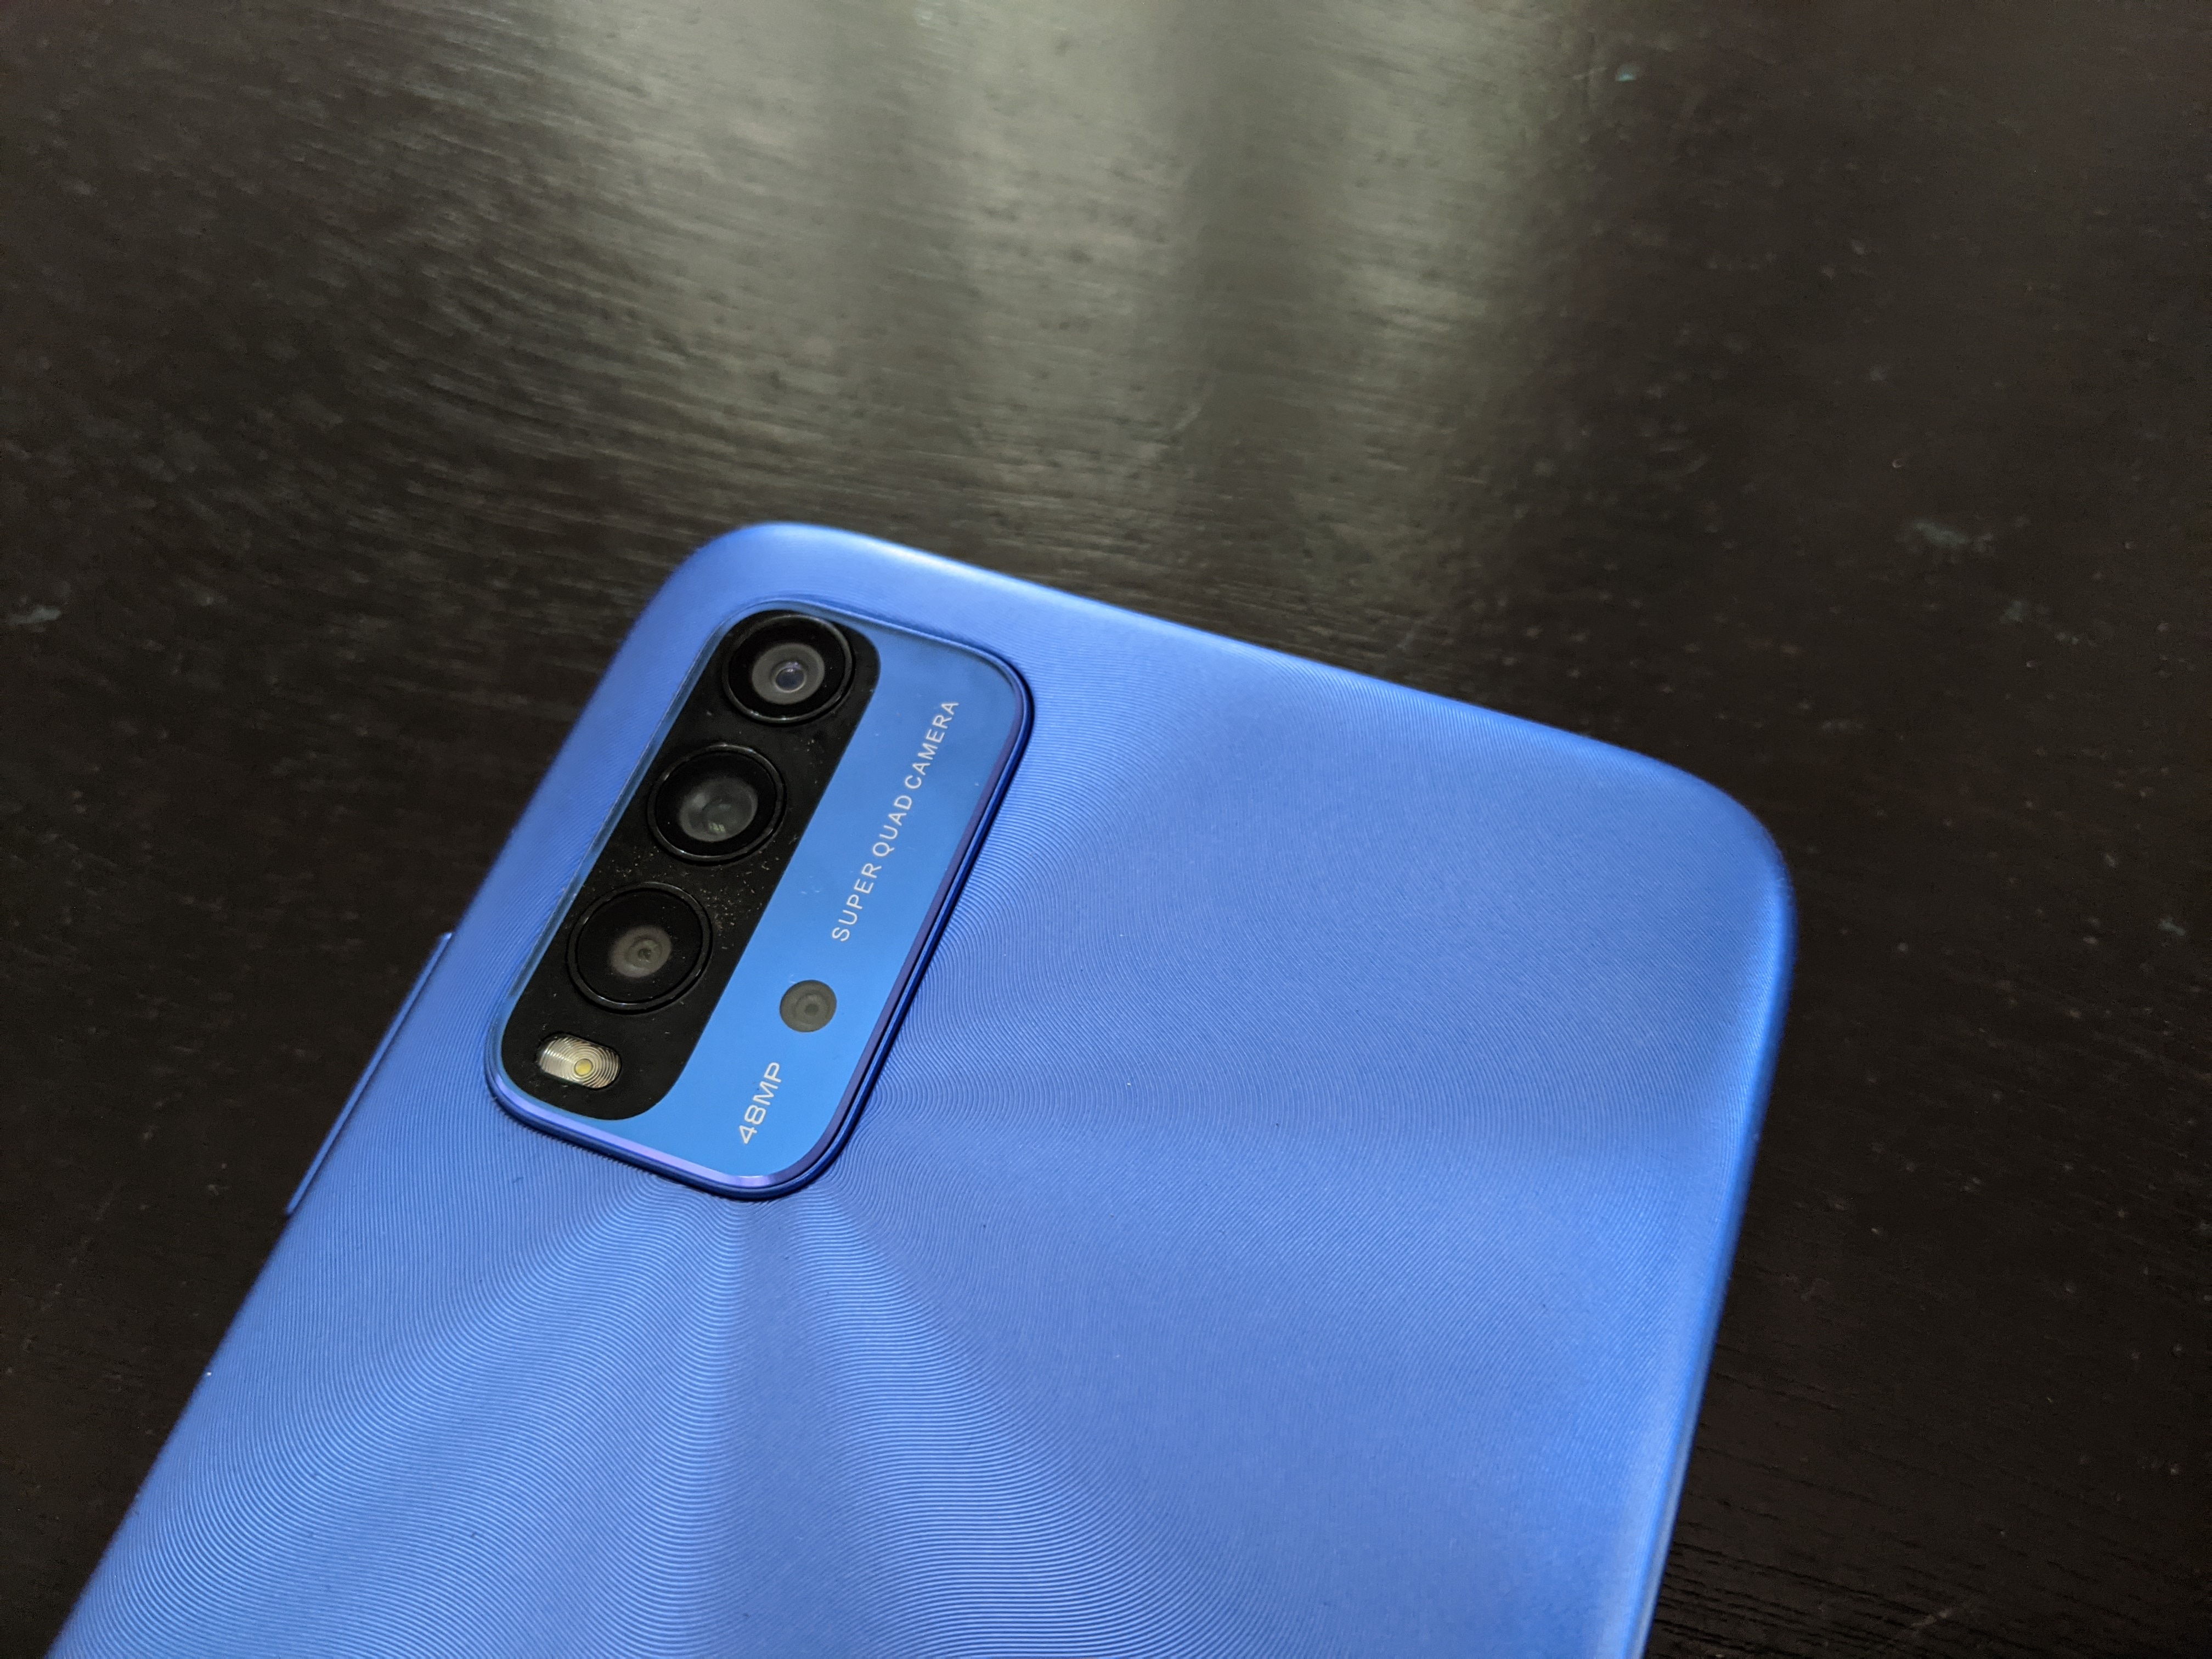 Xiaomi Redmi 9 Power with 6000 mAh battery, 48MP camera launched: Know more